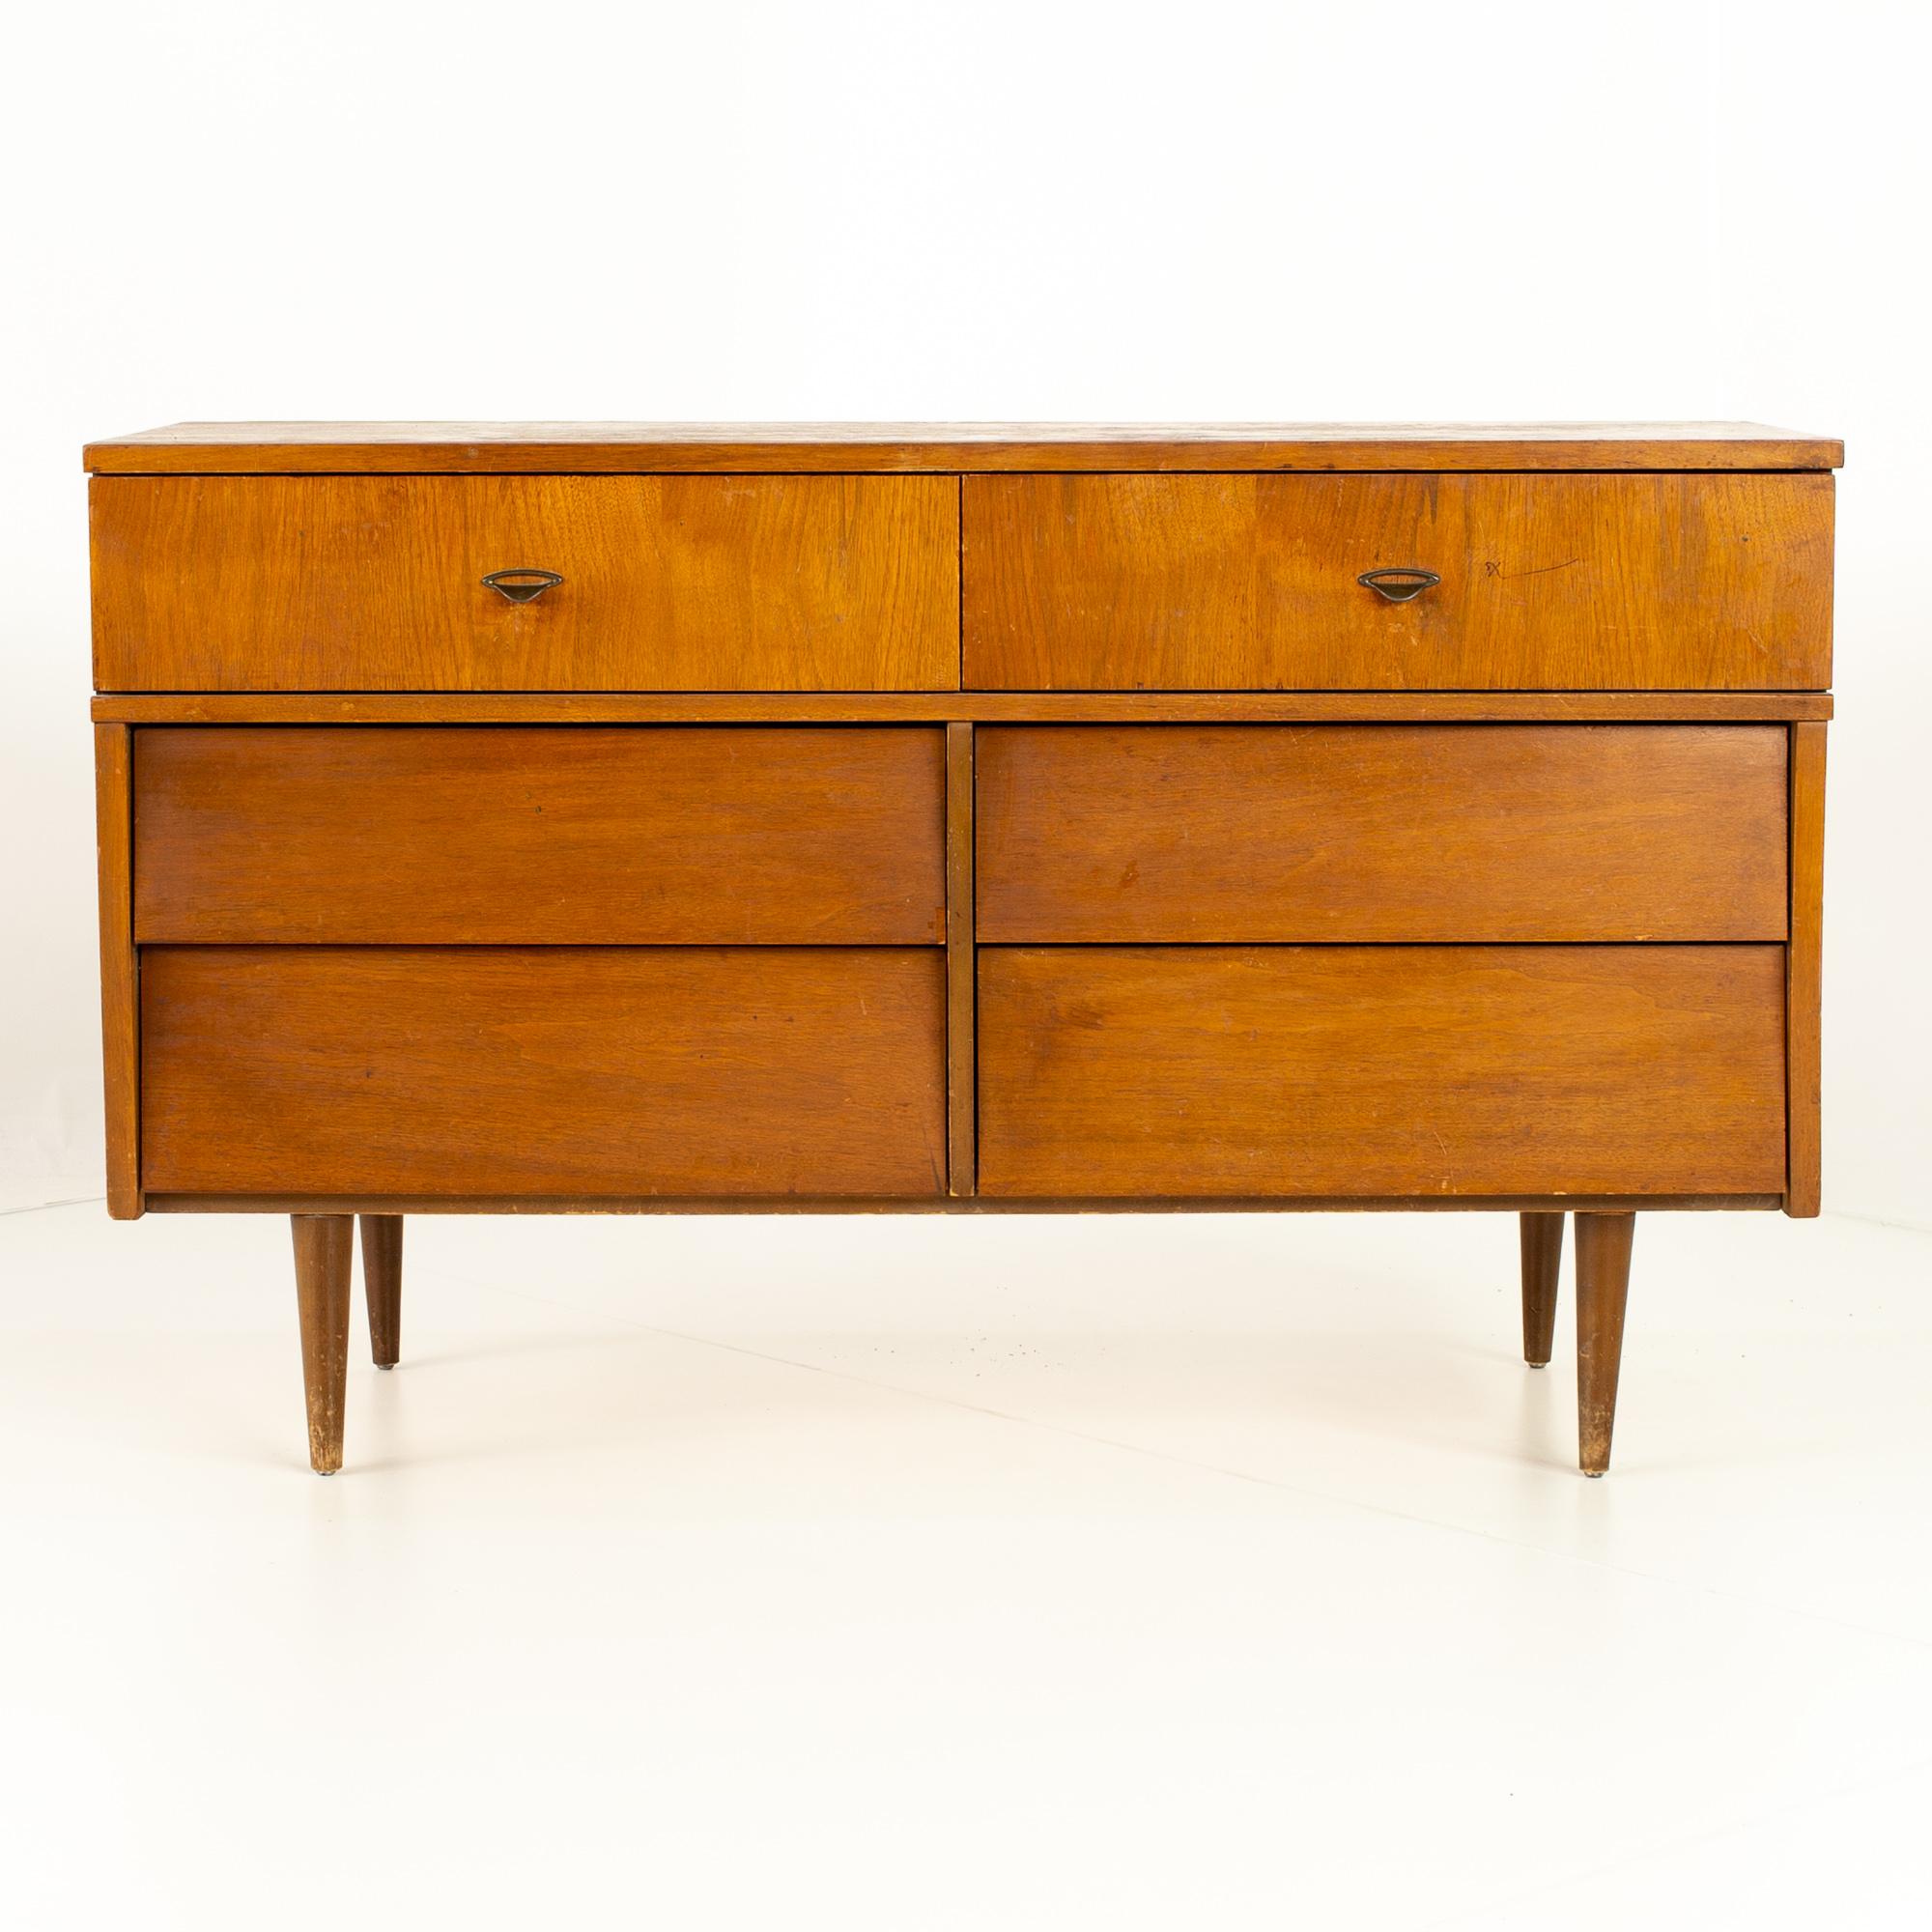 Restored Florence Knoll style Harmony House 6 drawer midcentury louvered walnut lowboy dresser
50 wide x 18 deep x 30.5 high
Restored vintage condition. Piece is restored upon purchase so it’s free of watermarks, chips or deep scratches with color